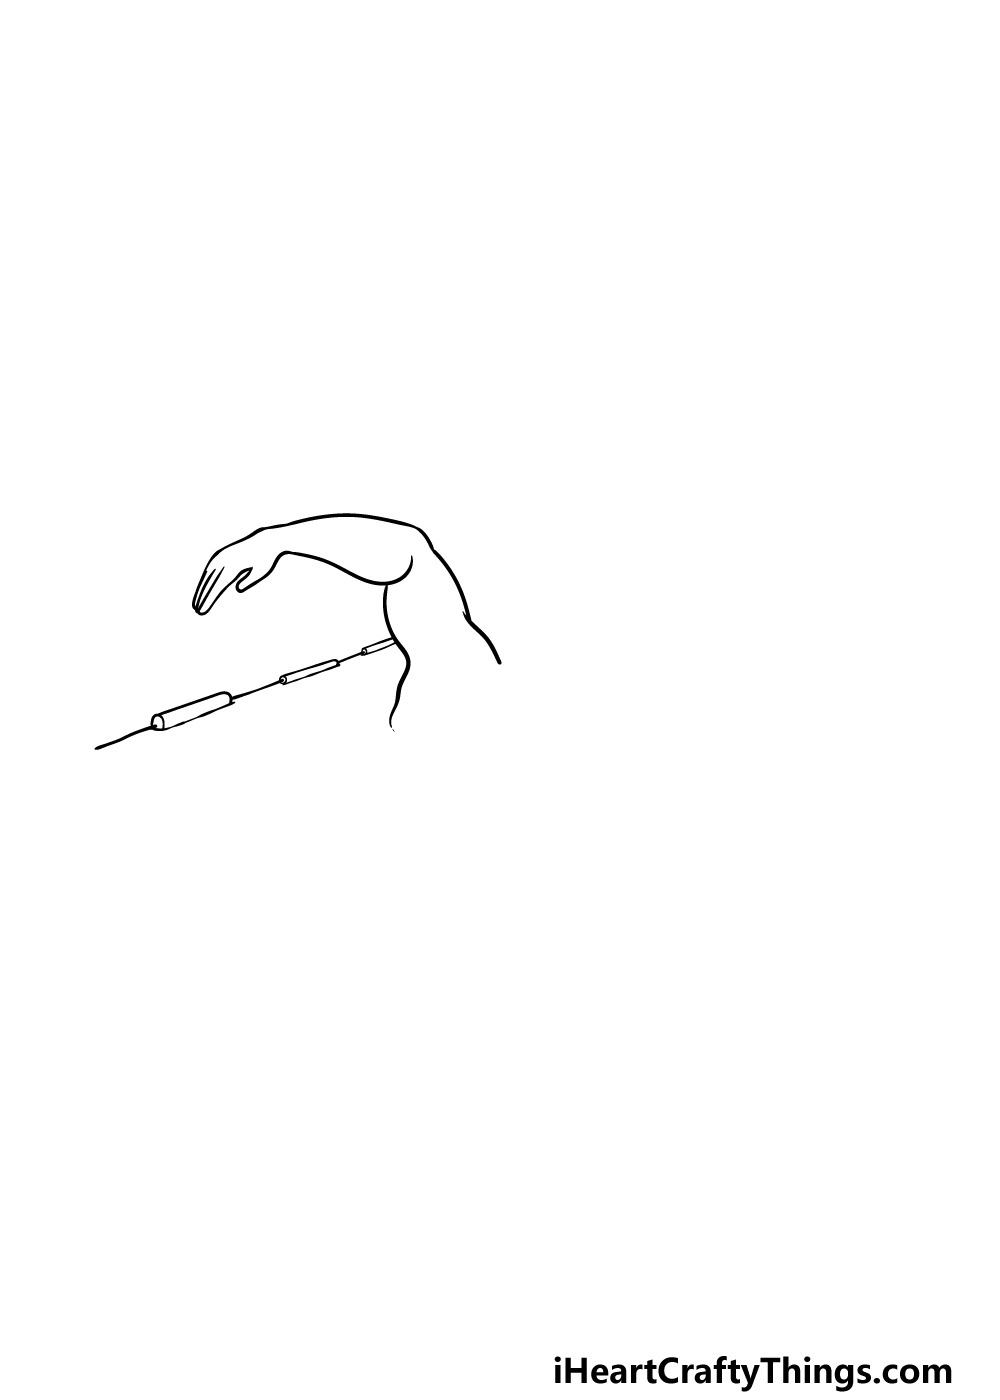 how to draw swimming step 1